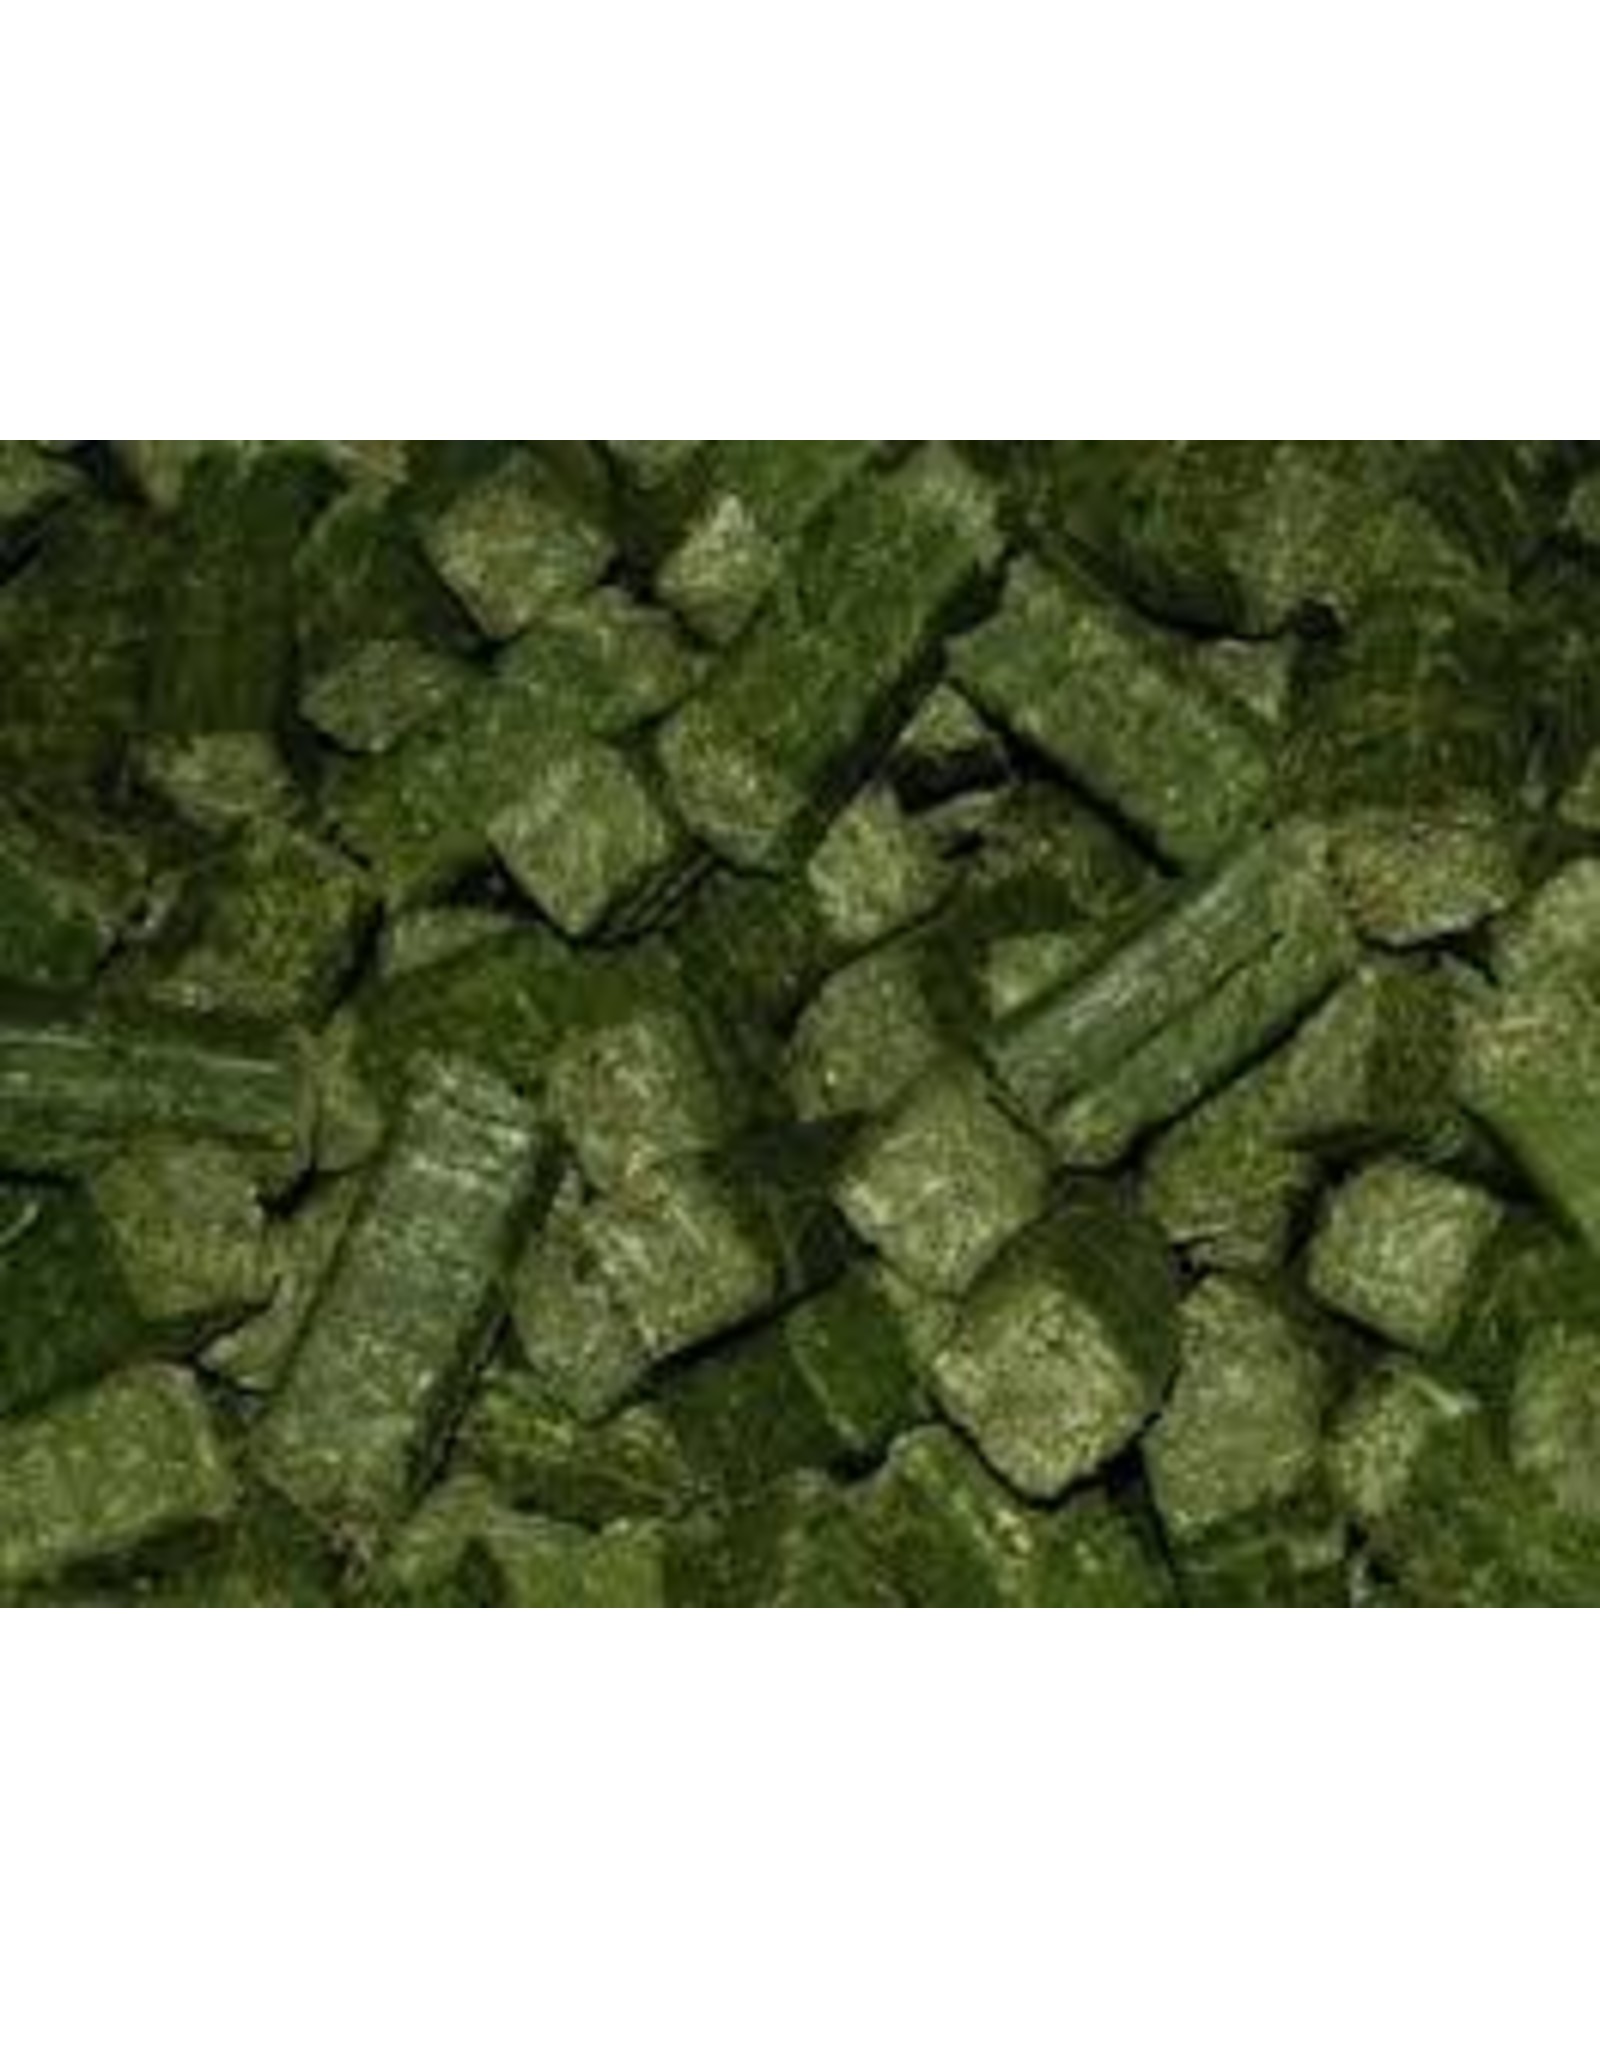 Sun Cured Sun Cured Alfalfa/Timothy Blended Cubes - 50 Ib  - 40 bags/pallet